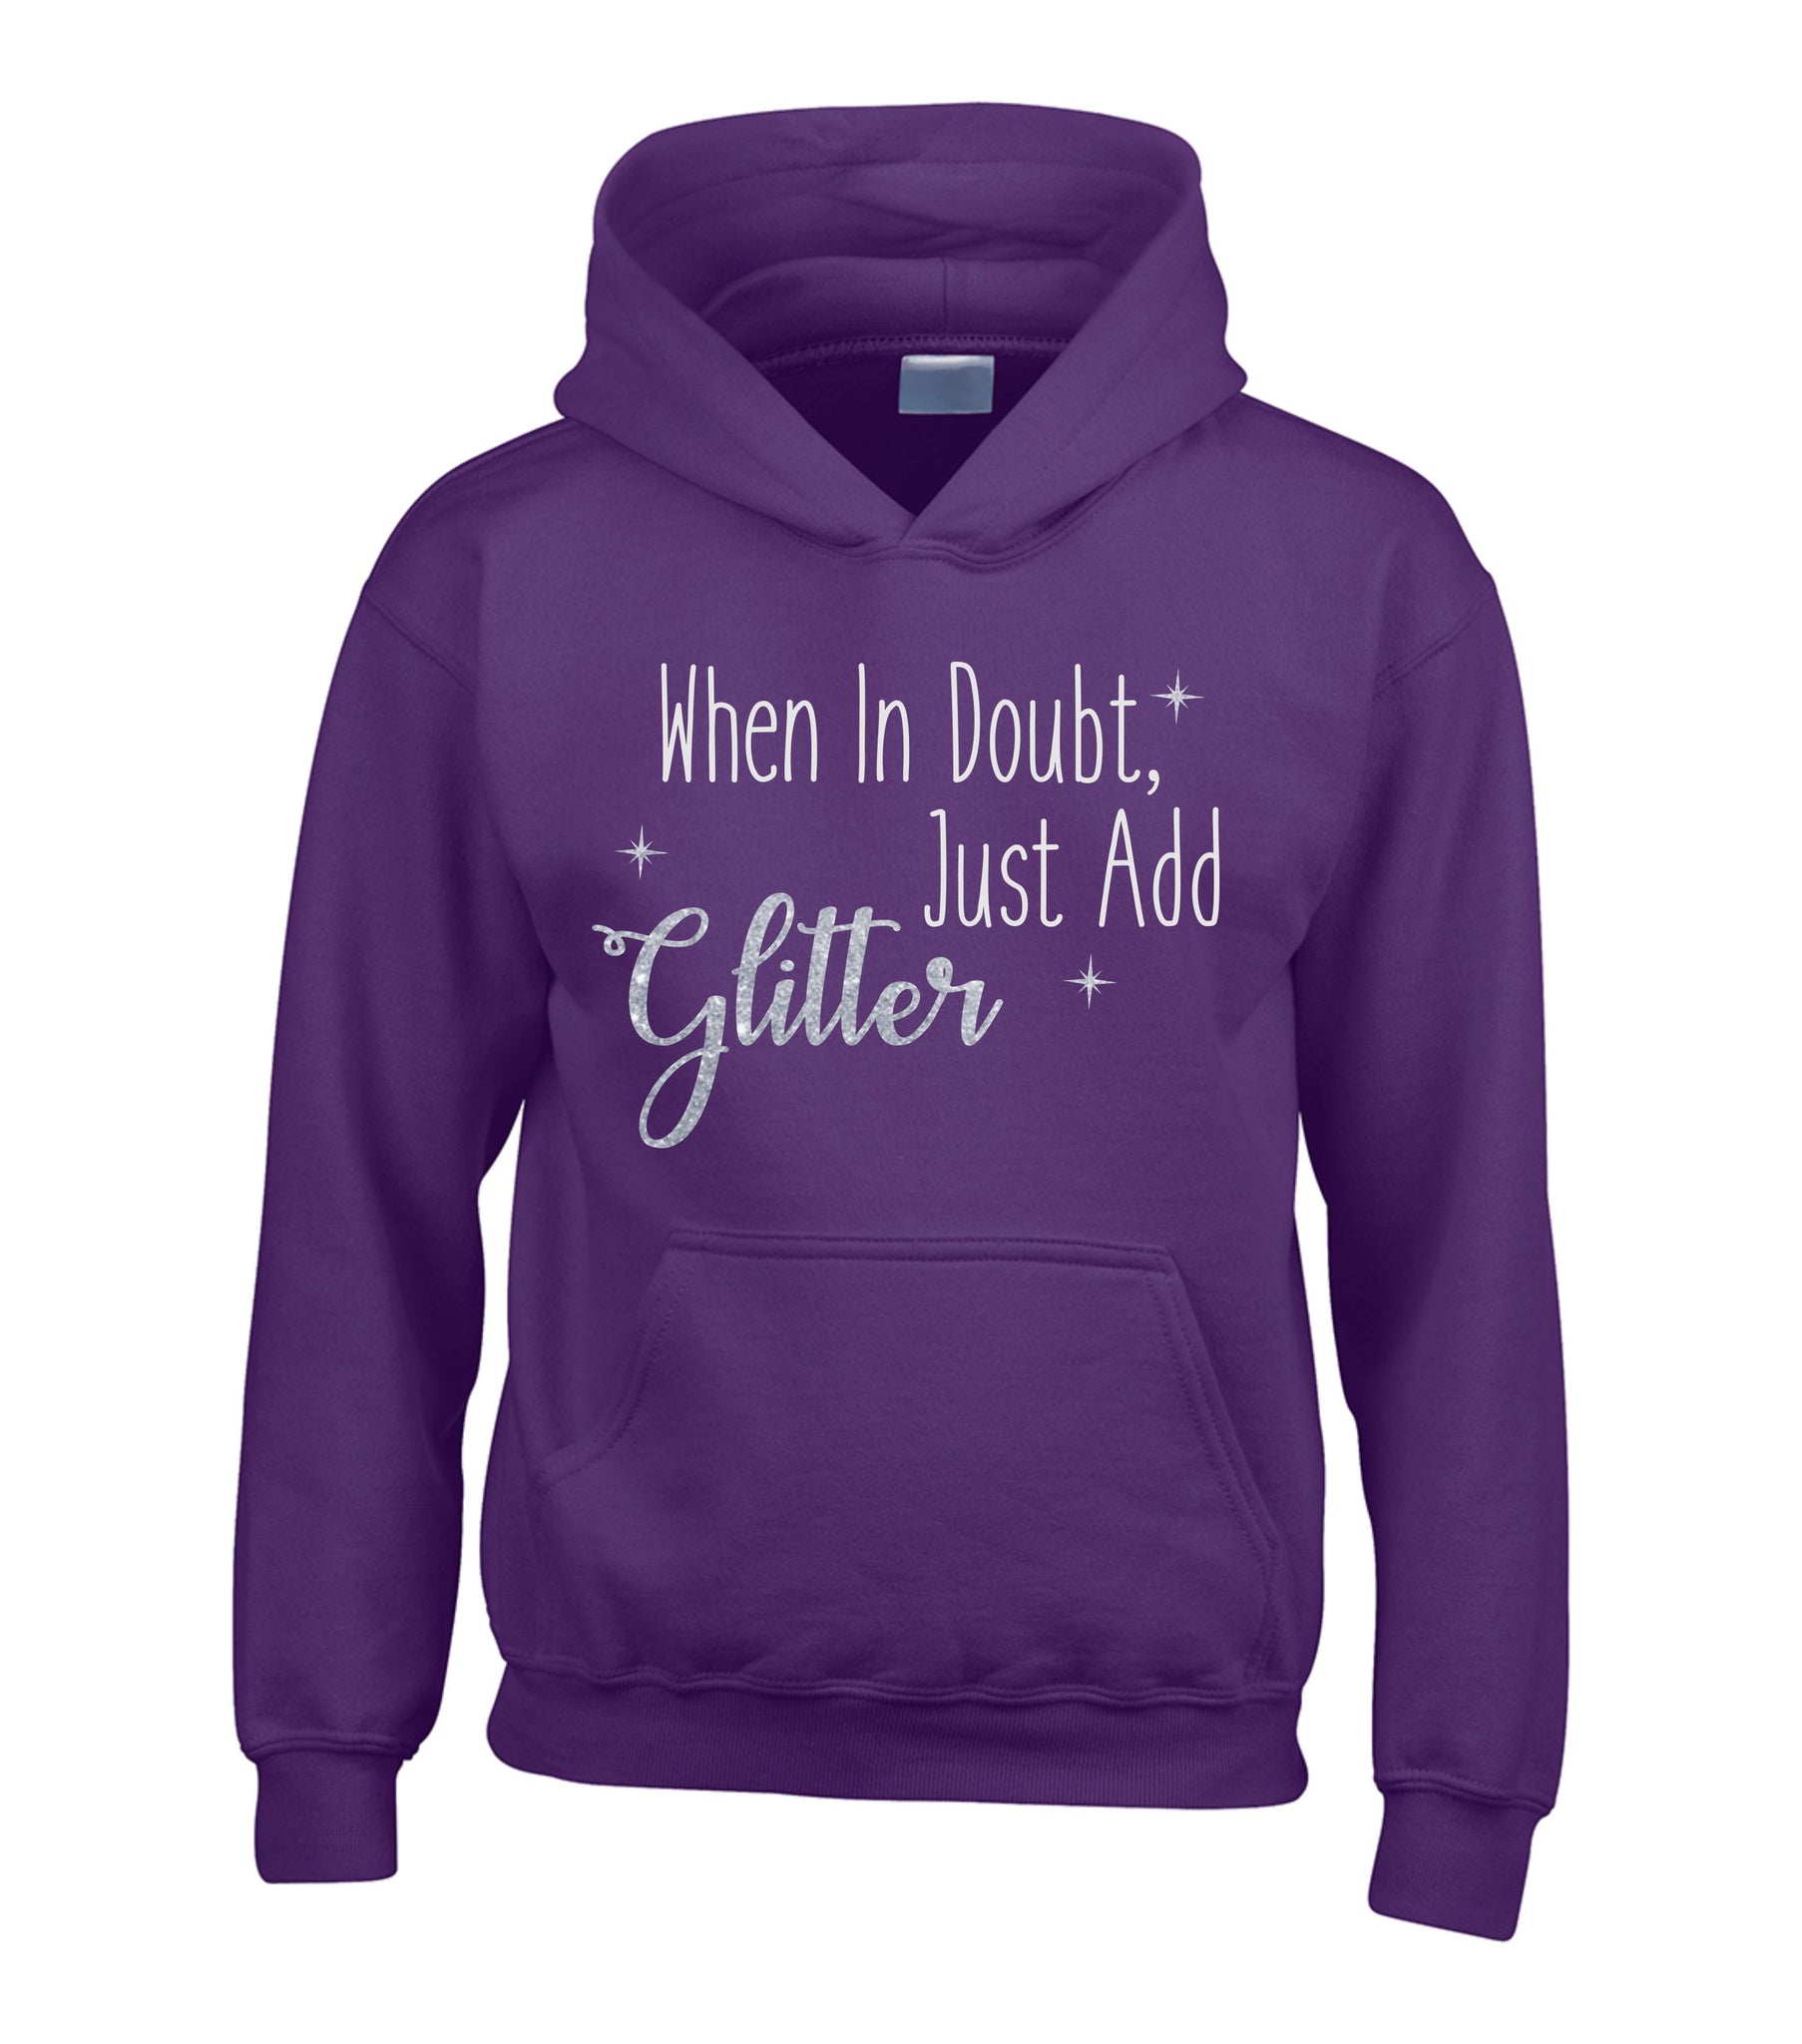 When in Doubt, Just Add Glitter Hoodie with White Glitter and Sparkling Silver Print